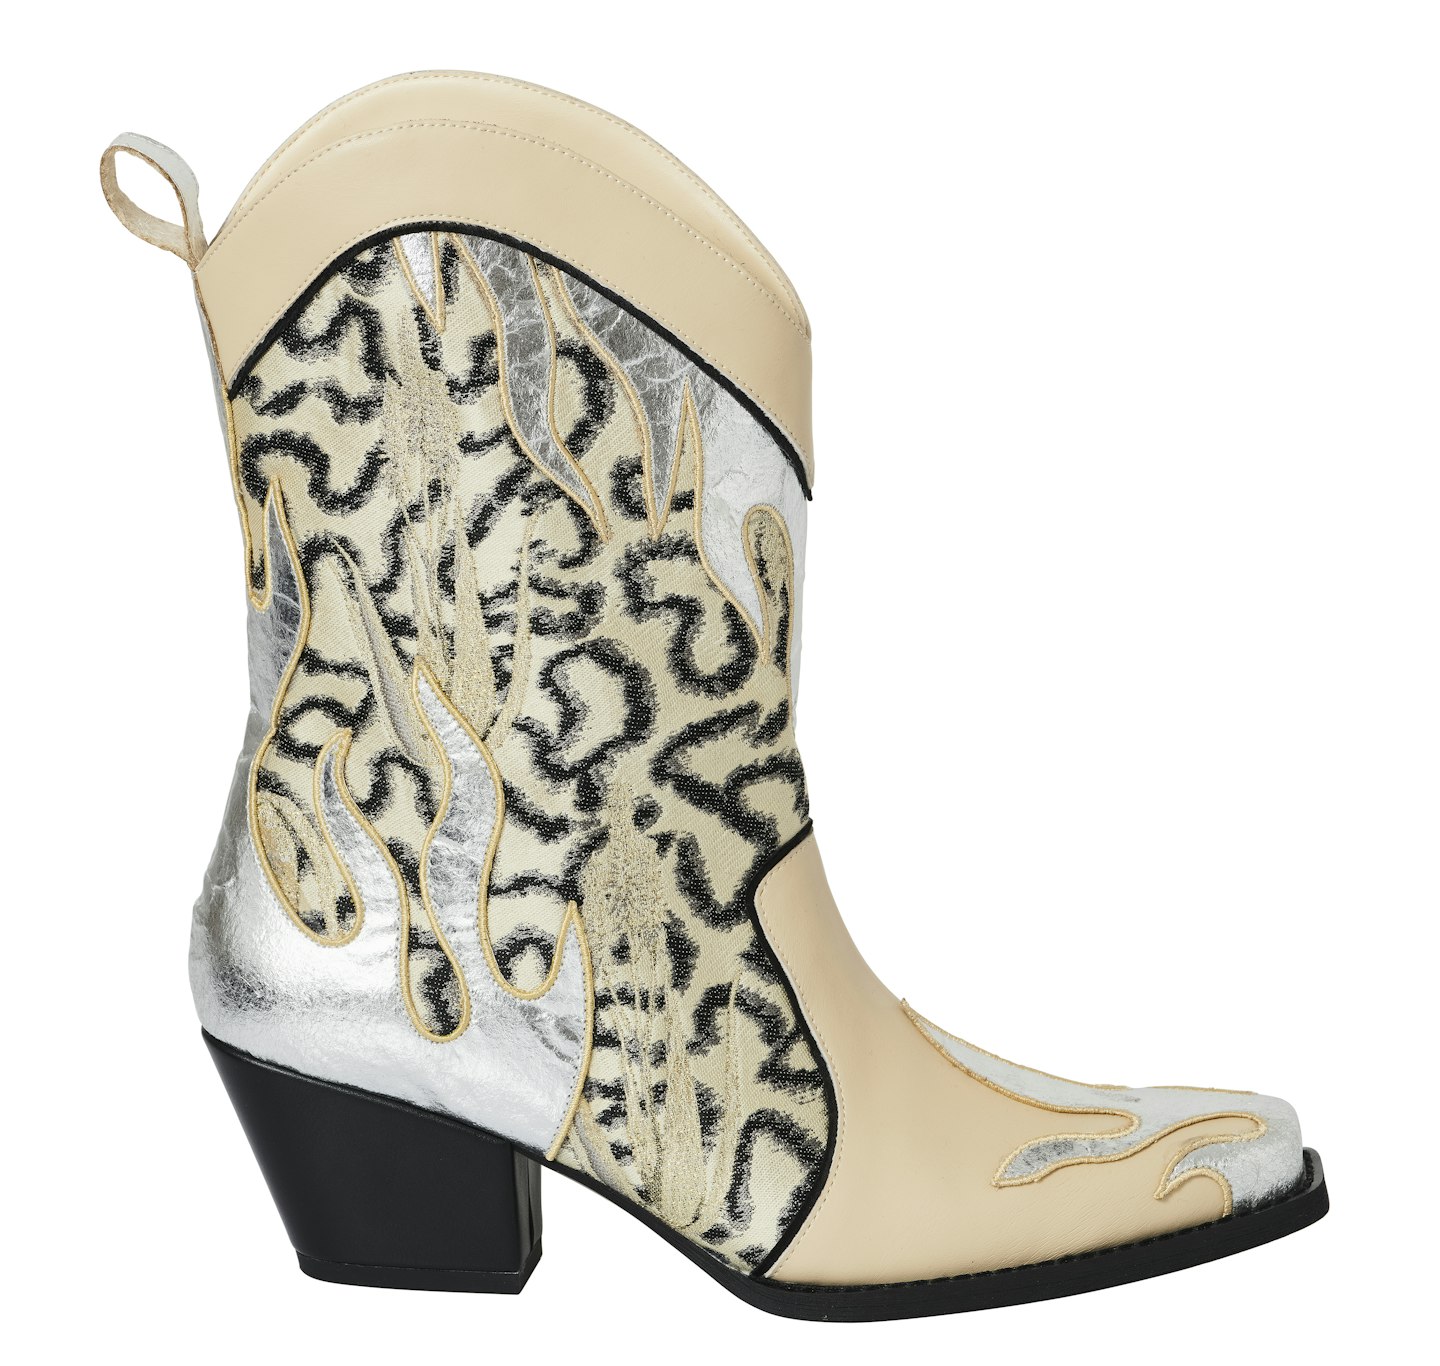 Jacquard-Patterned Boots, £99.99